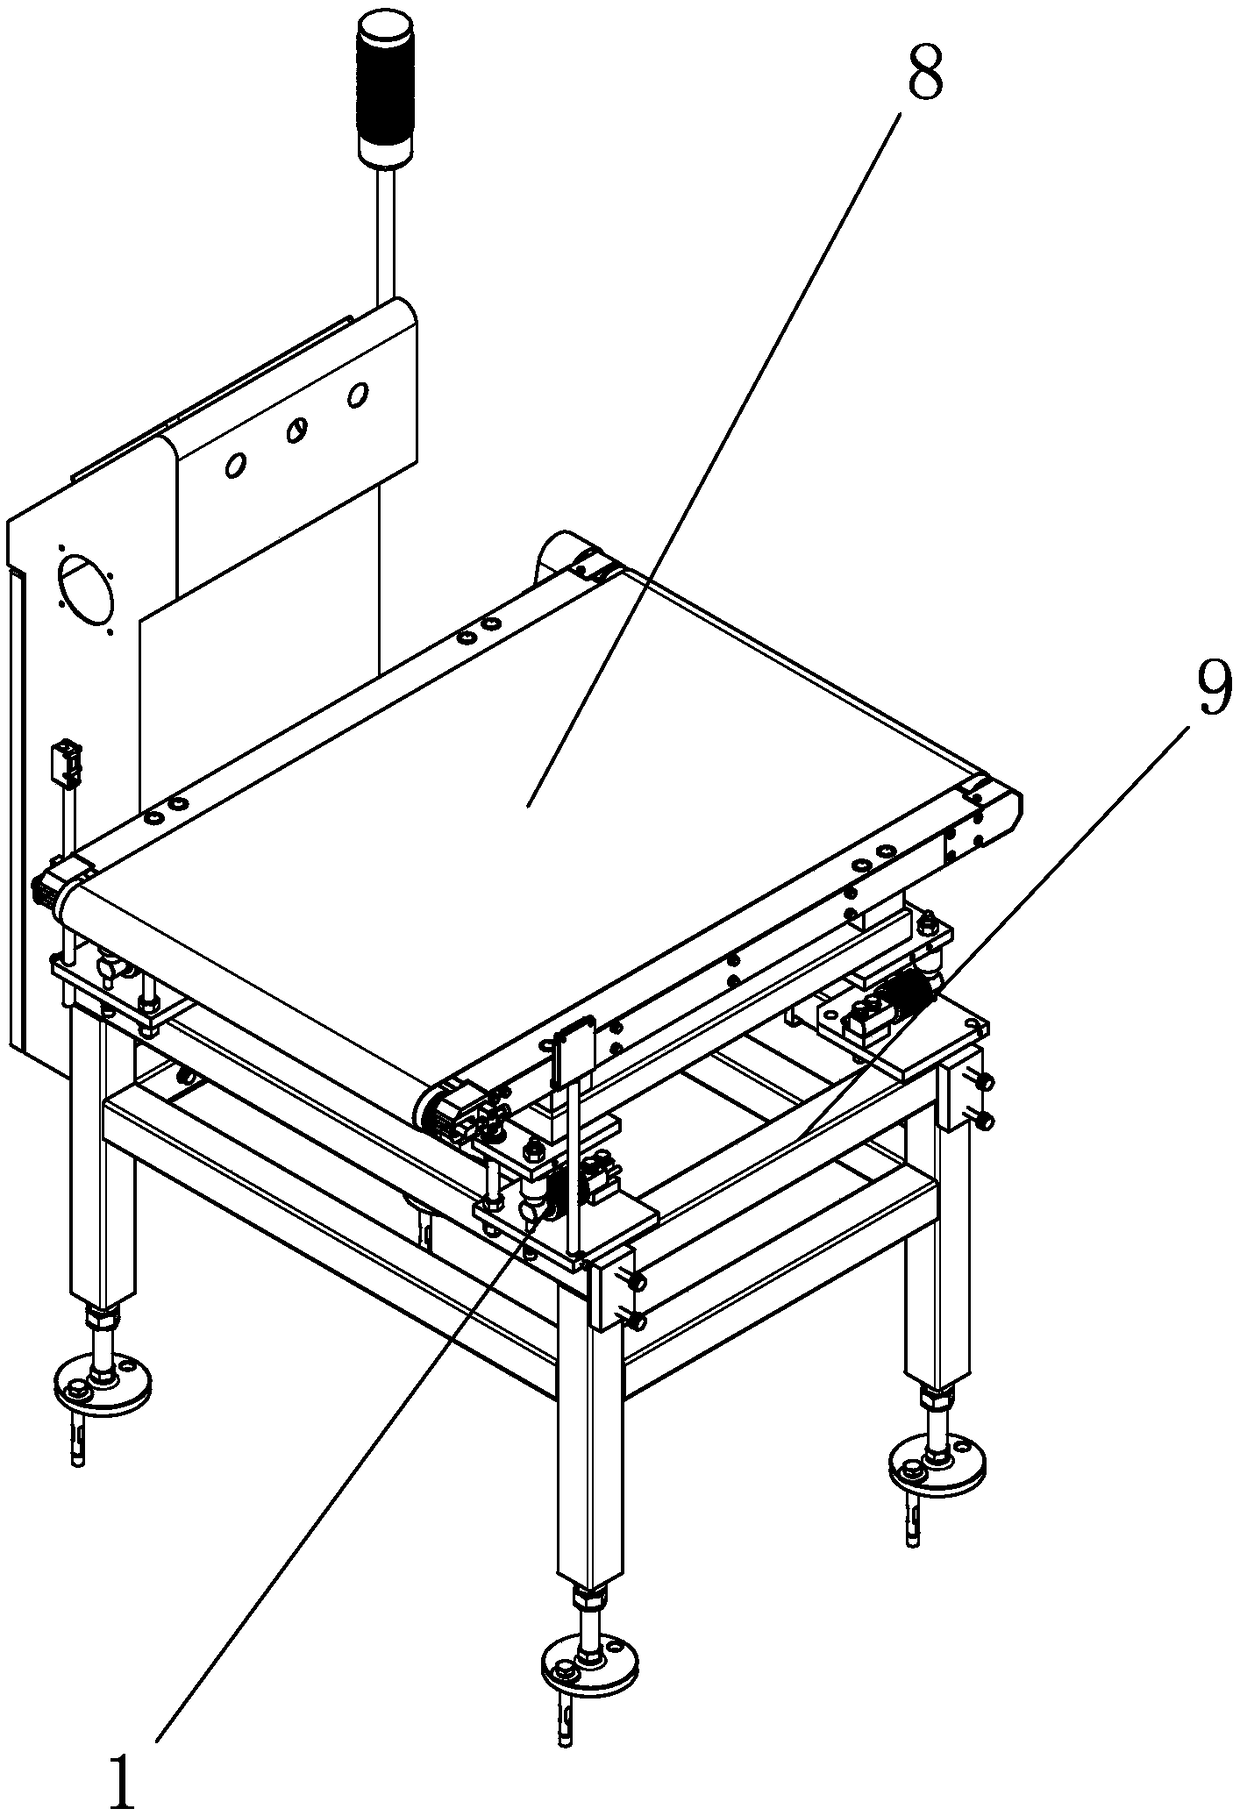 Fast installation method for bellows weighing sensors